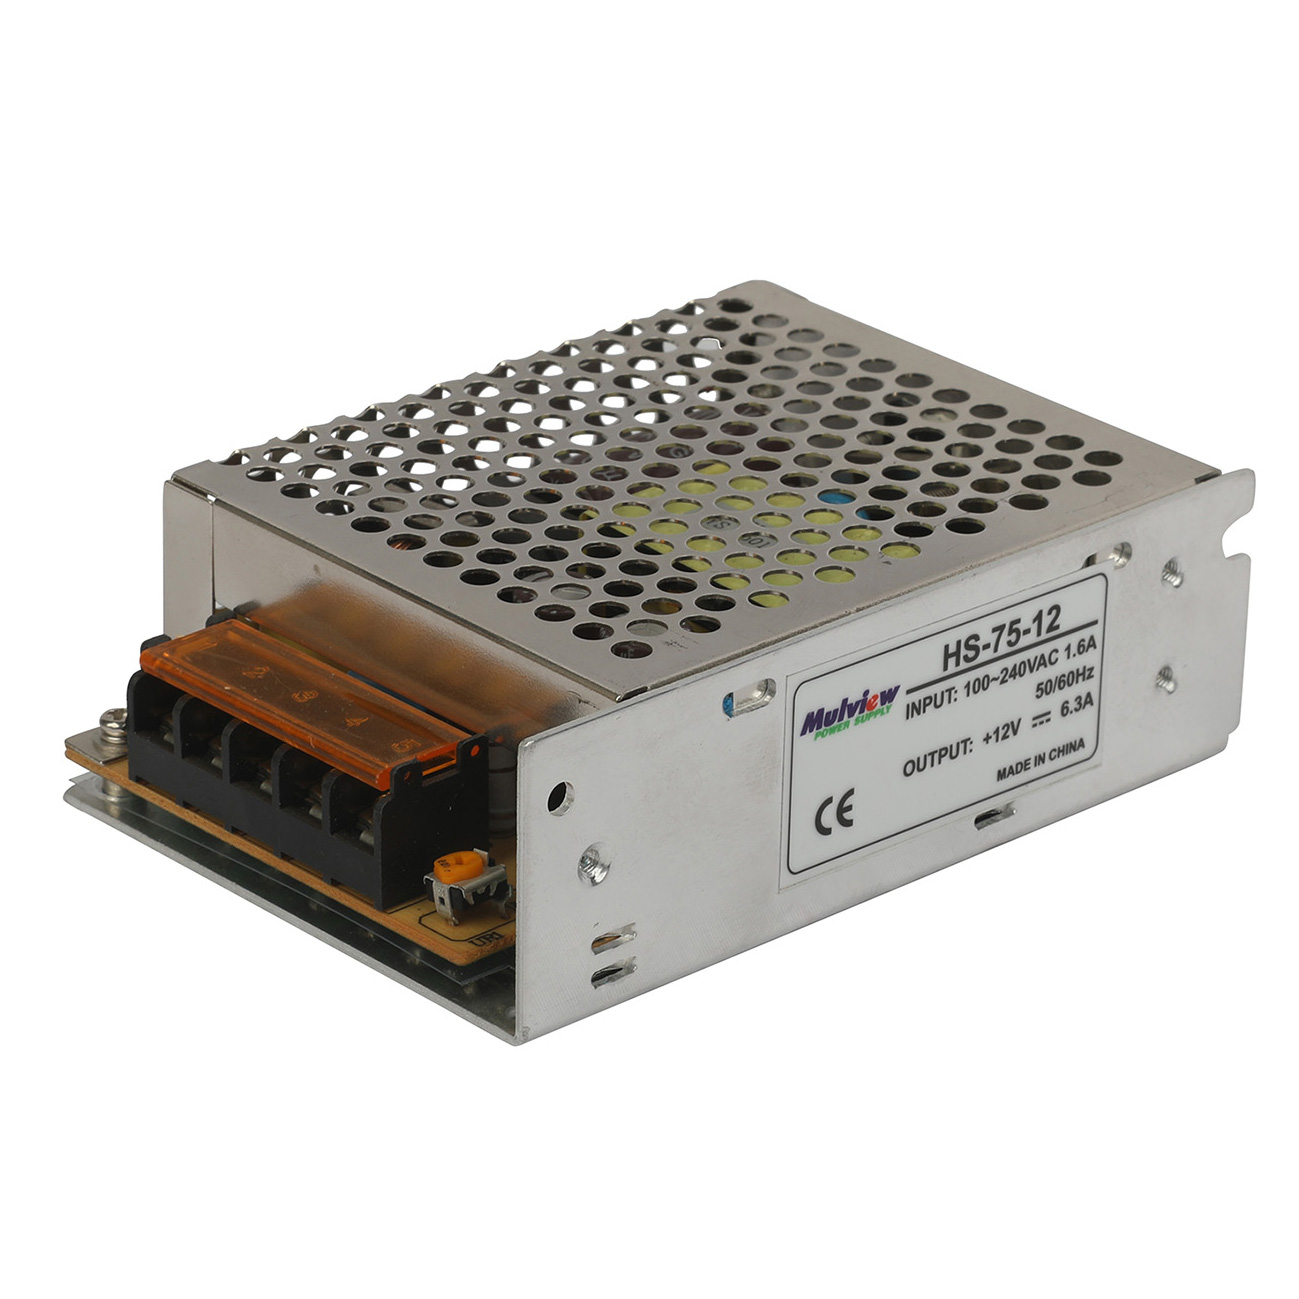 75W single output switching power supply